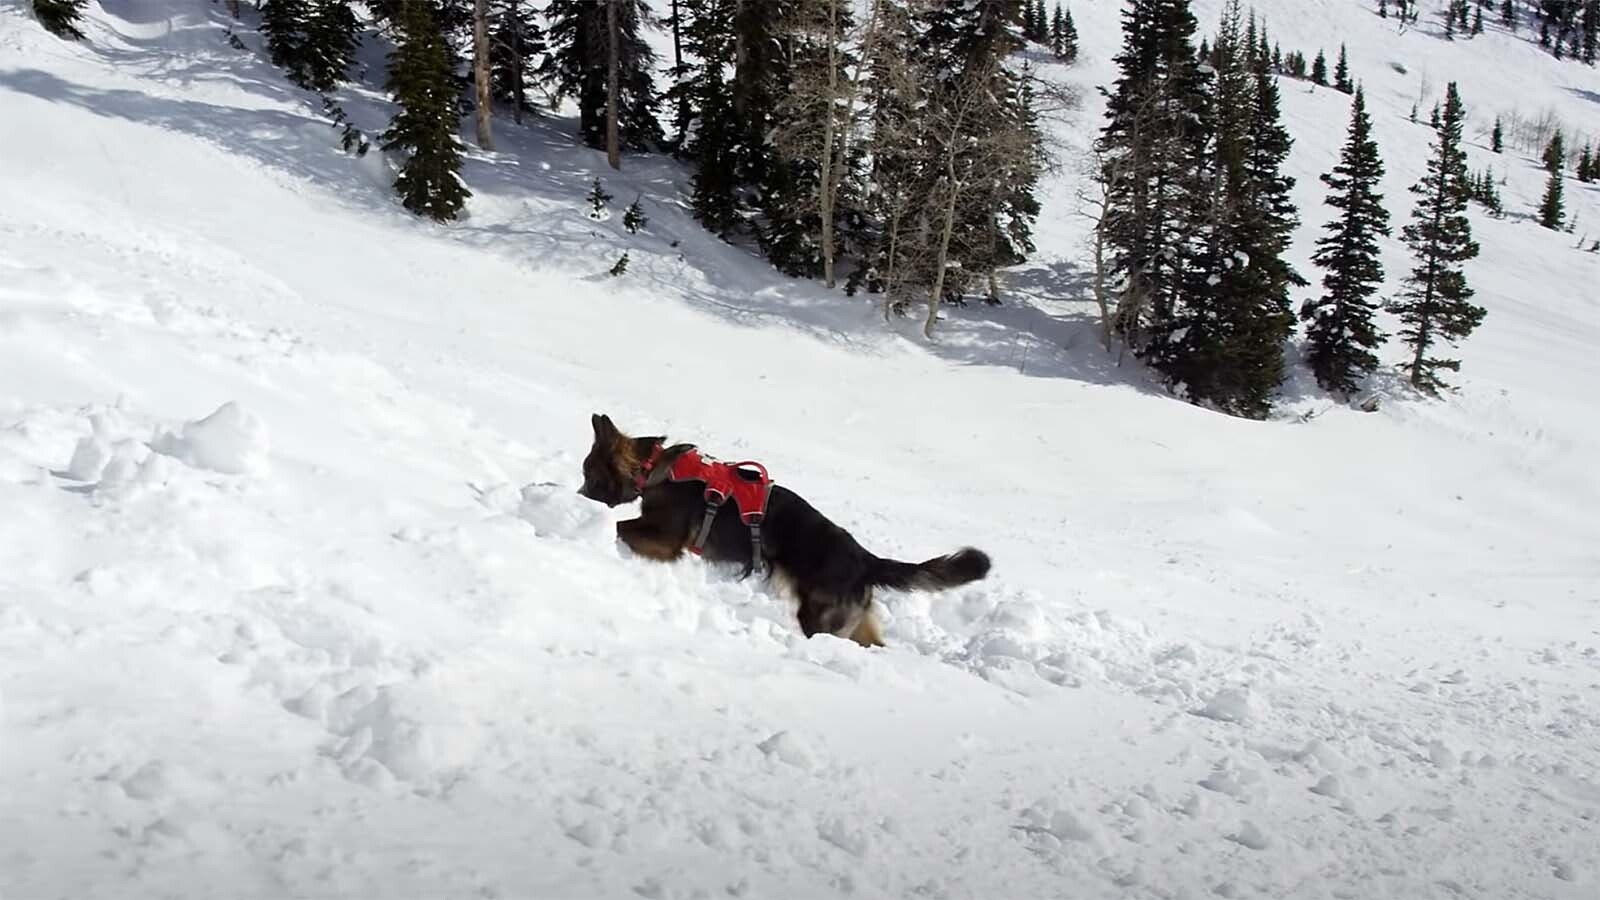 When they're not living a rock star lifestyle as ski slope celebrities, the Jackson Hole Mountain Resort avalanche rescue dogs train.